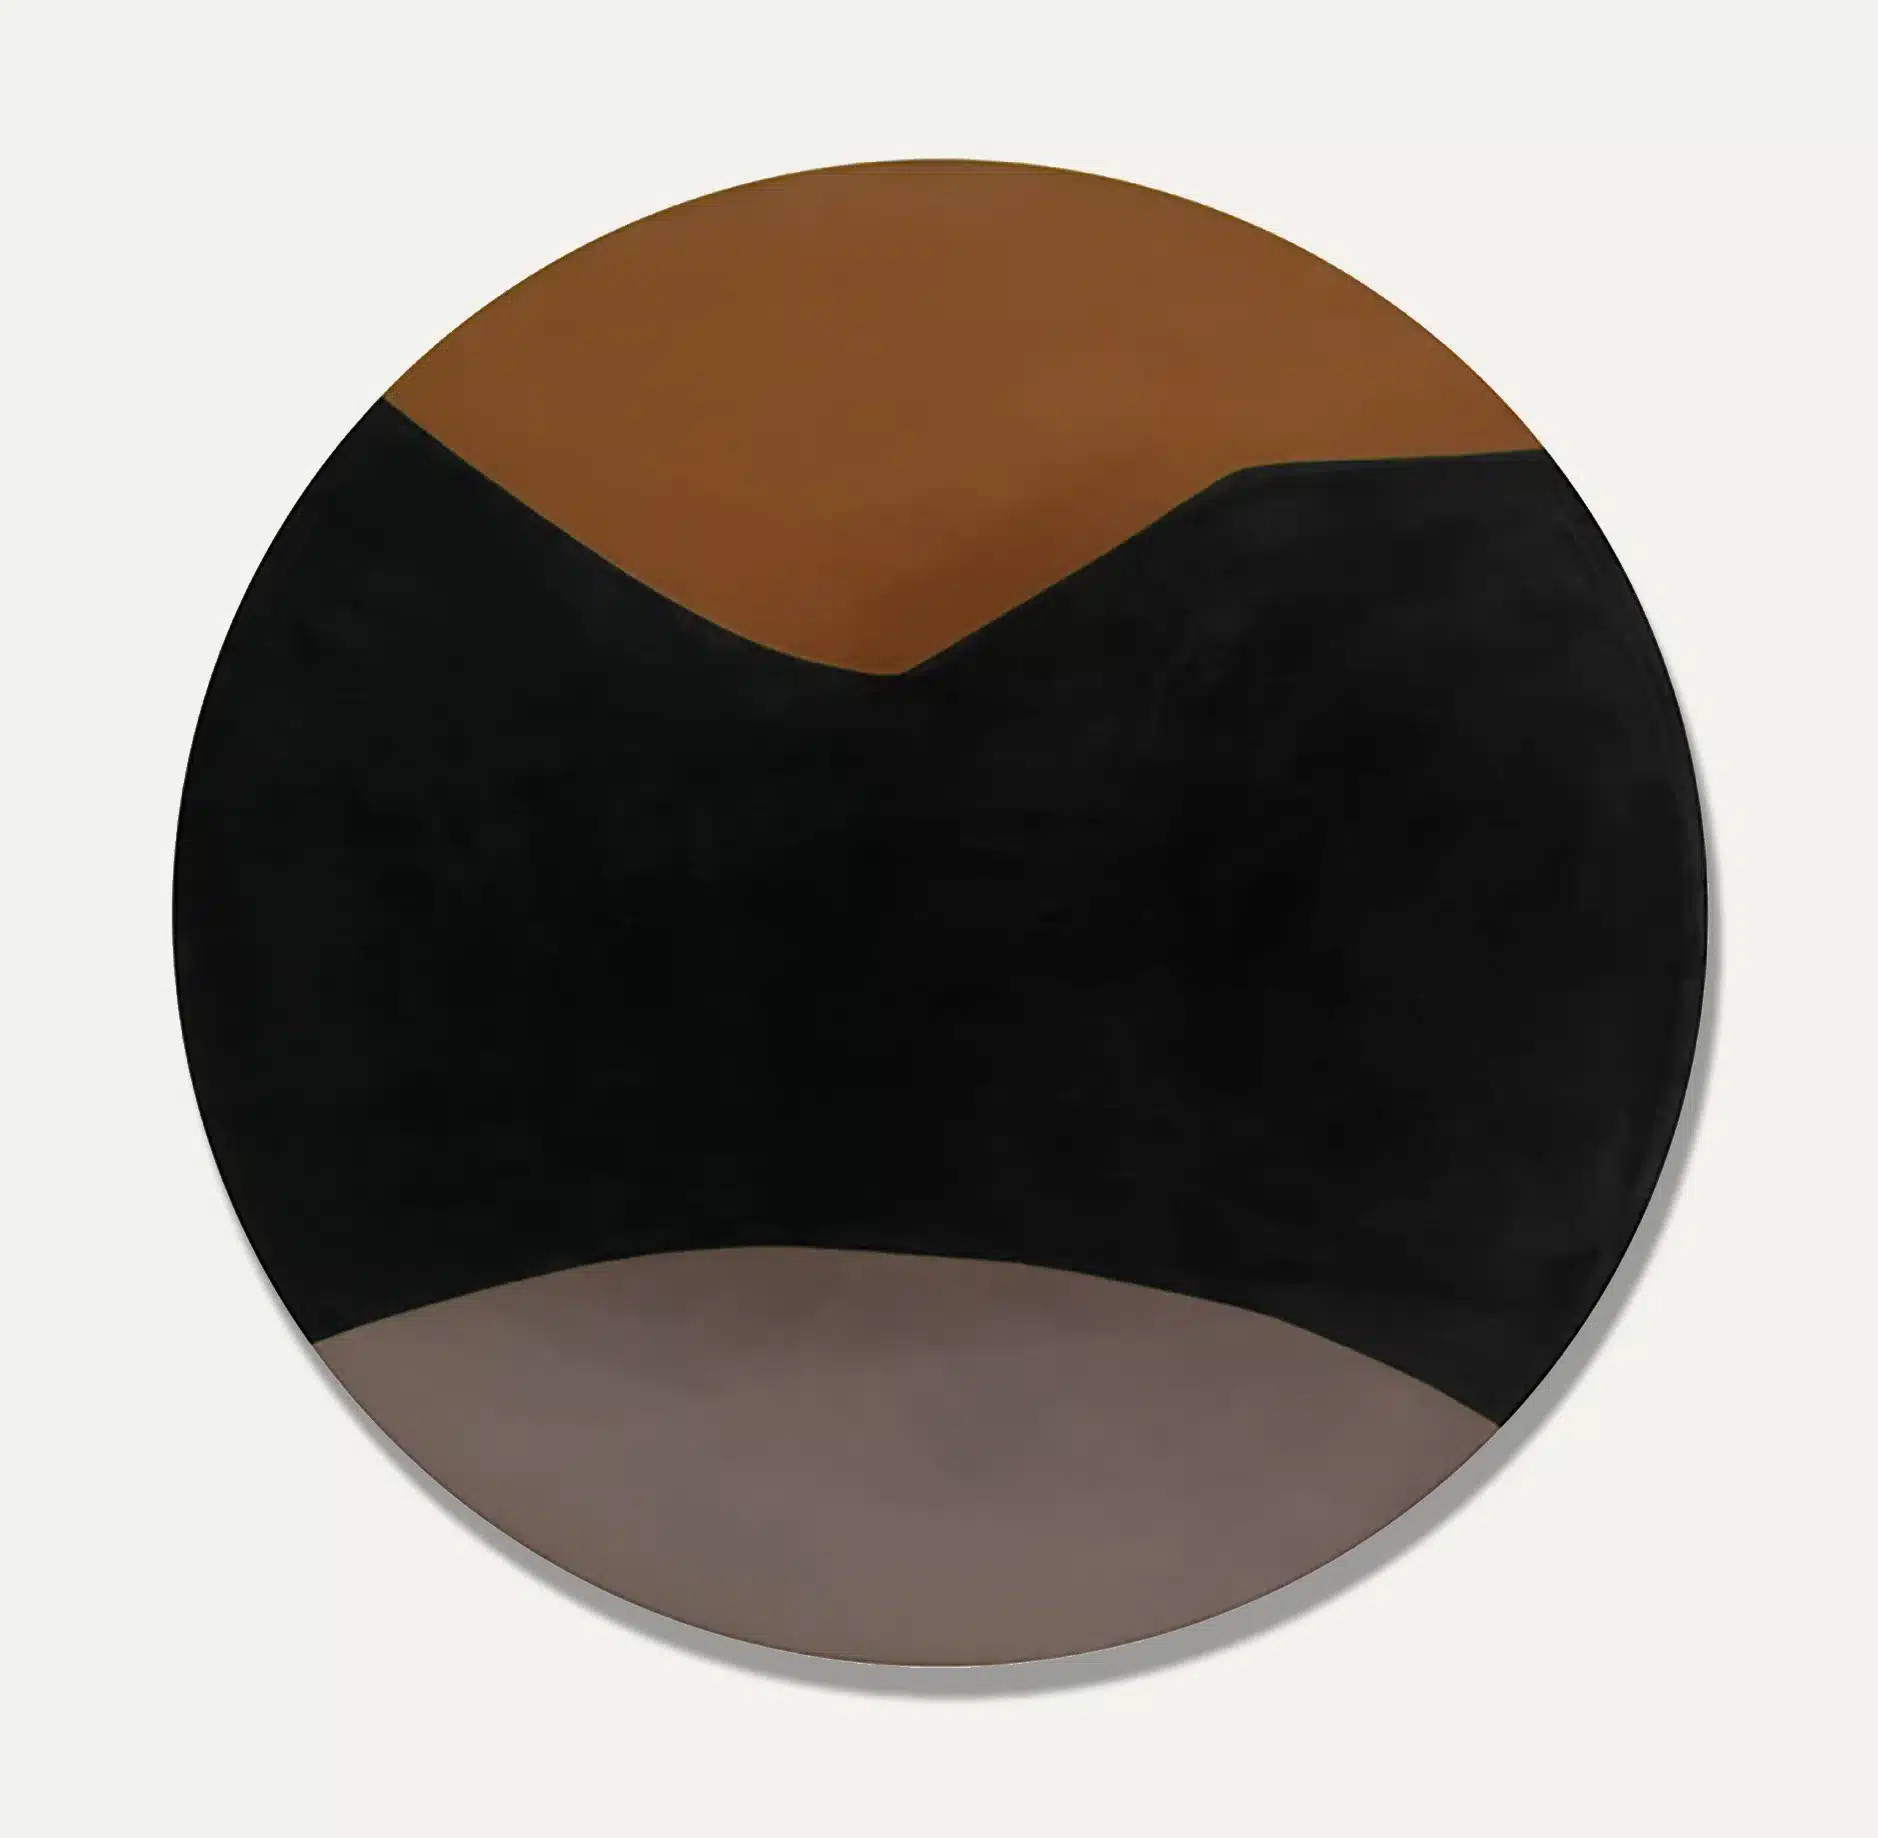 Stretch of Black No. 5, 1954. Paint on canvas, Tondo: dia: 40 in.